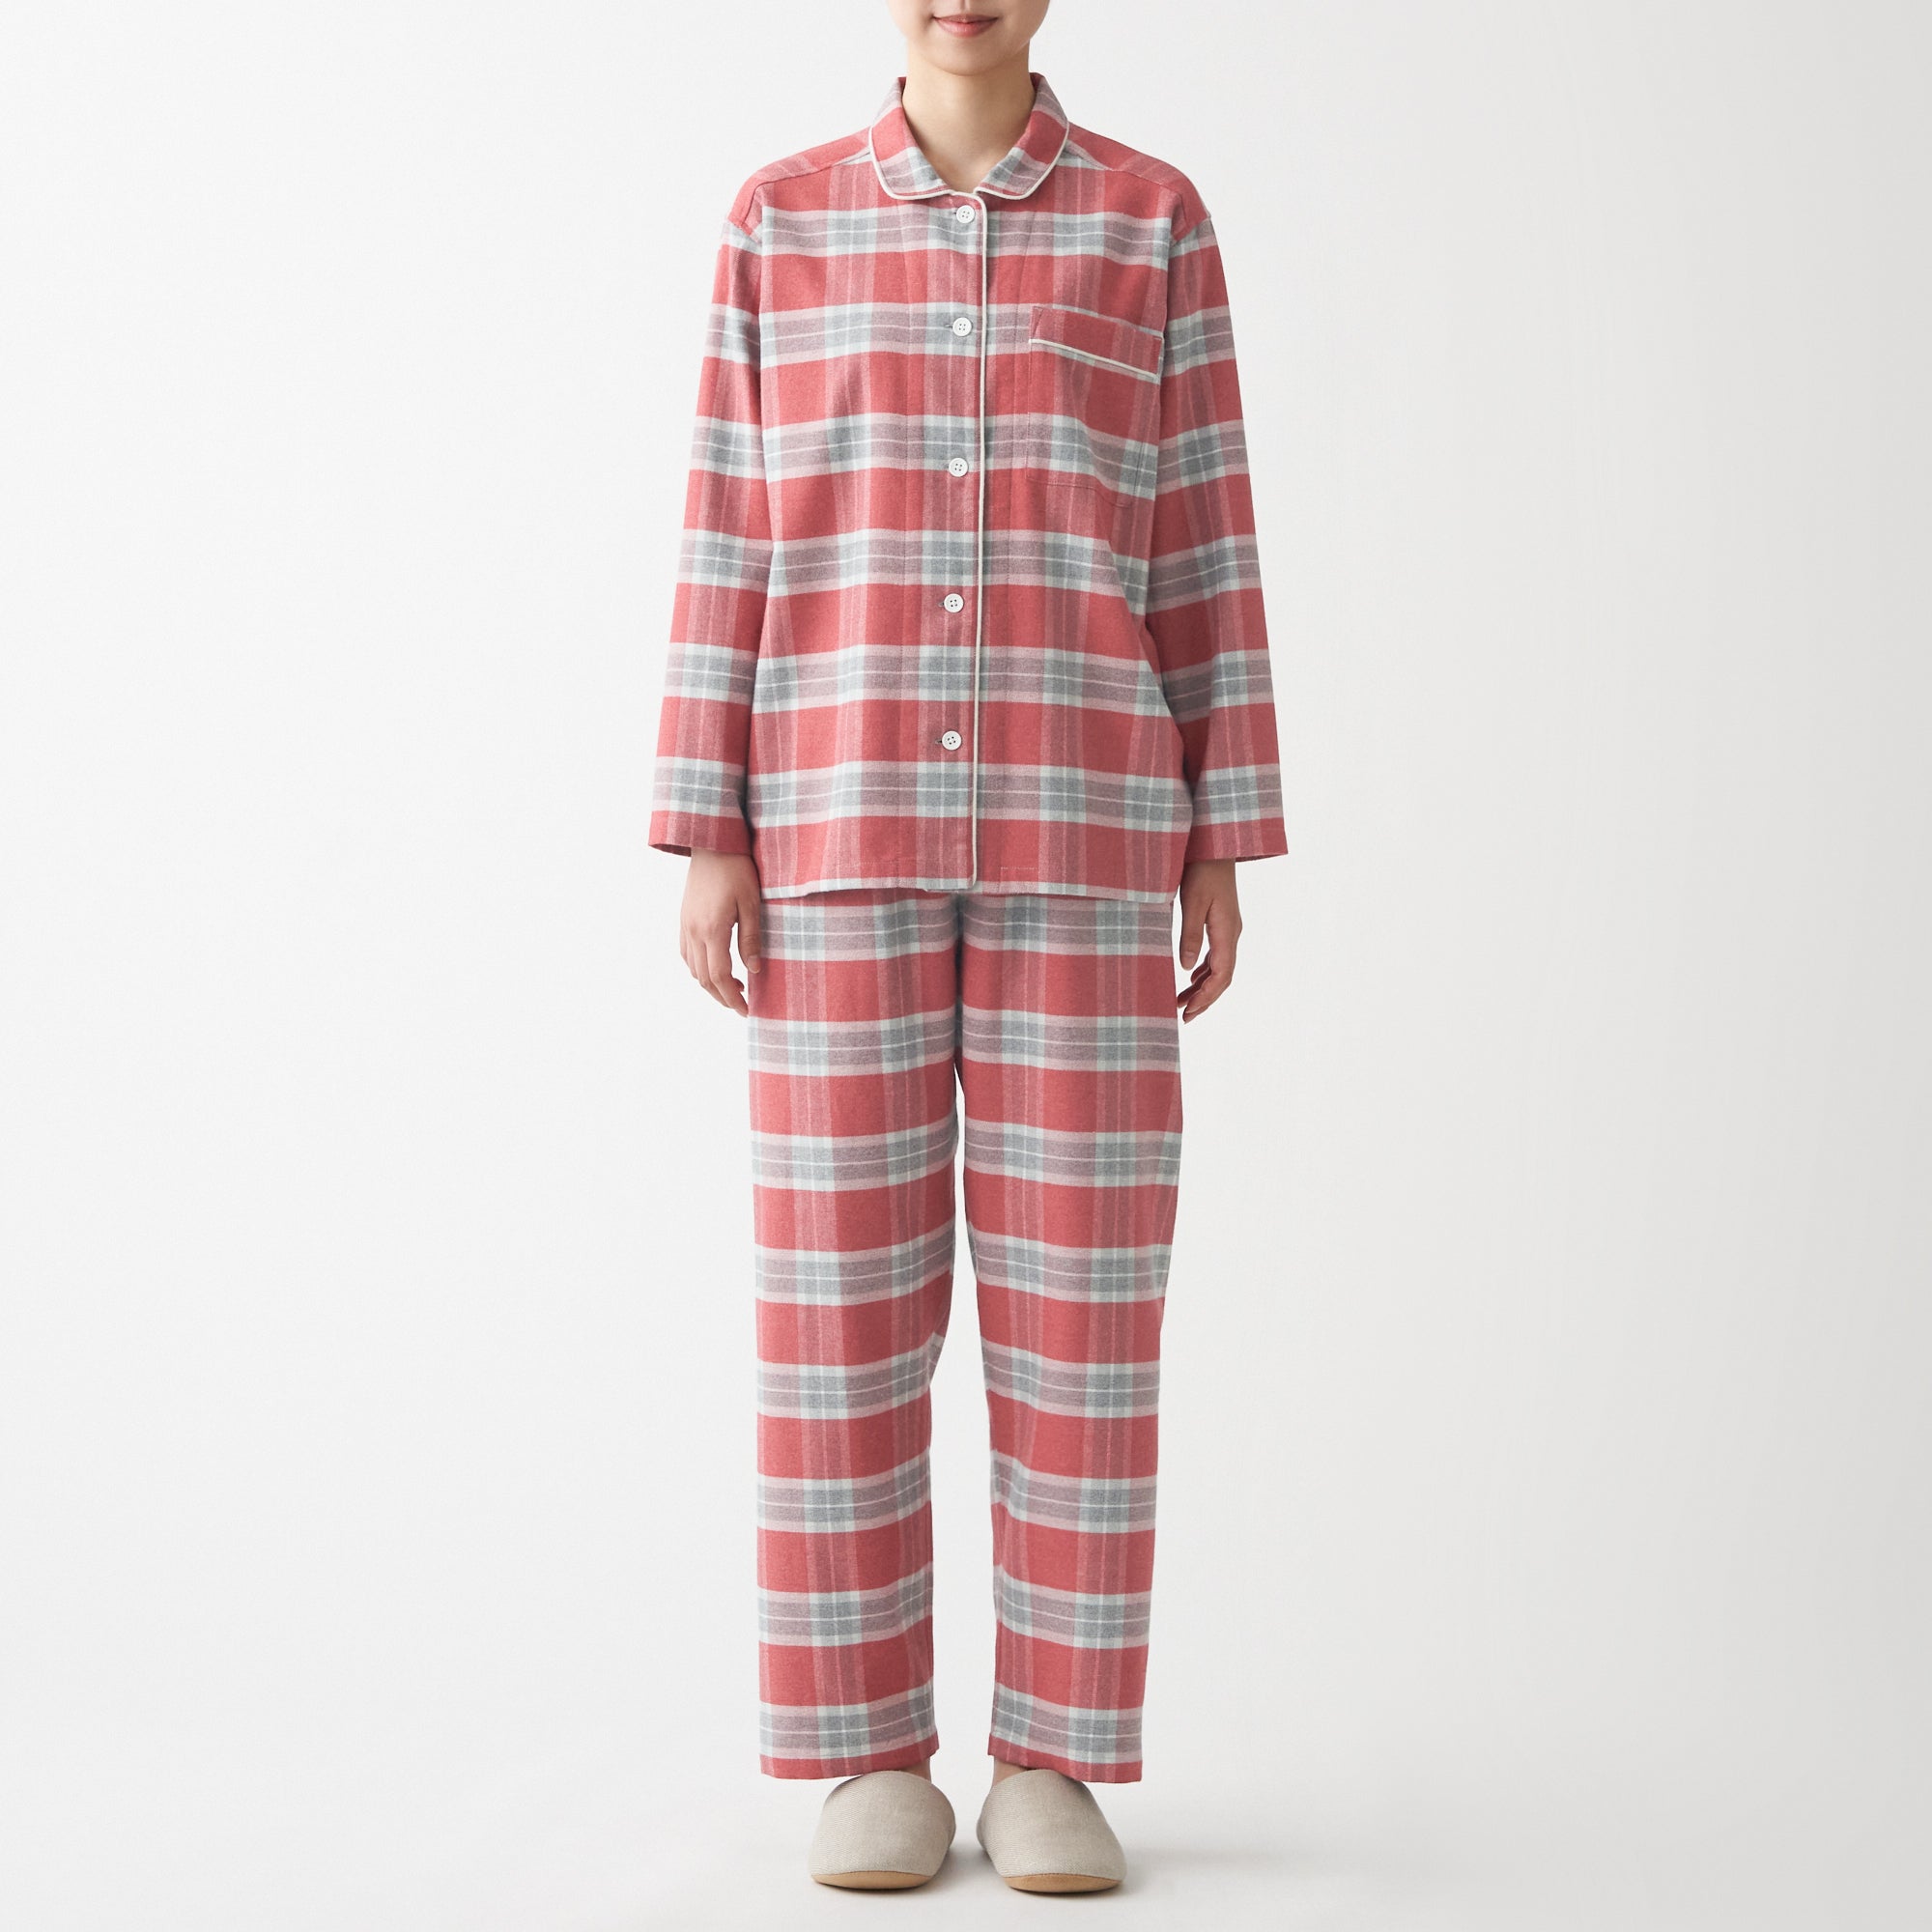 Women's Organic Cotton Side Seamless Flannel Patterned Pajamas